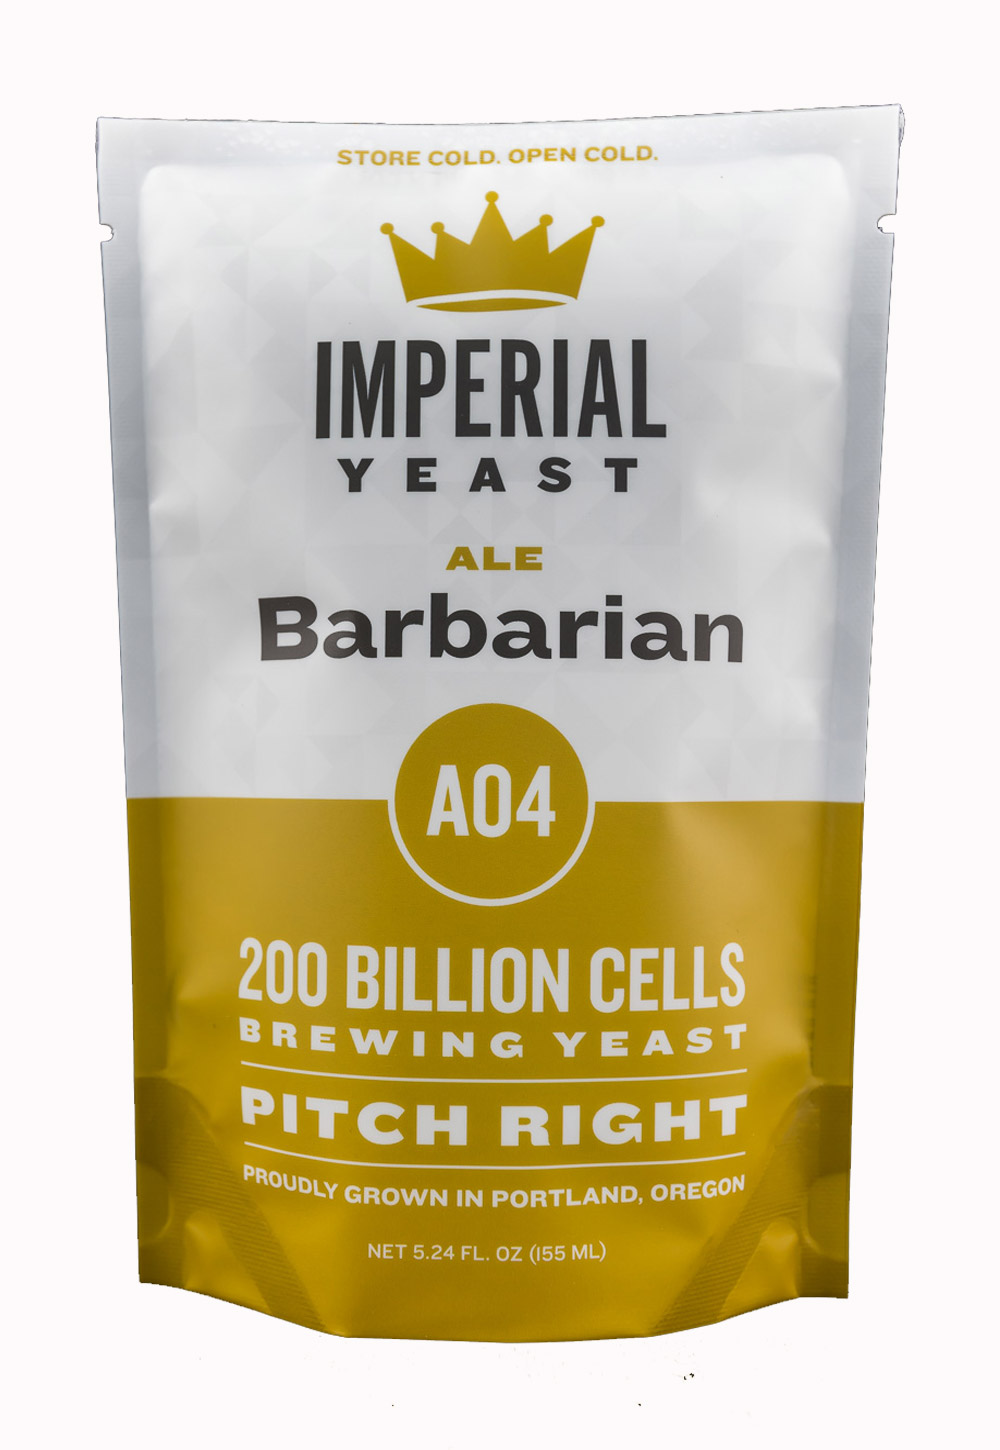 Imperial Yeast A04 Barbarian